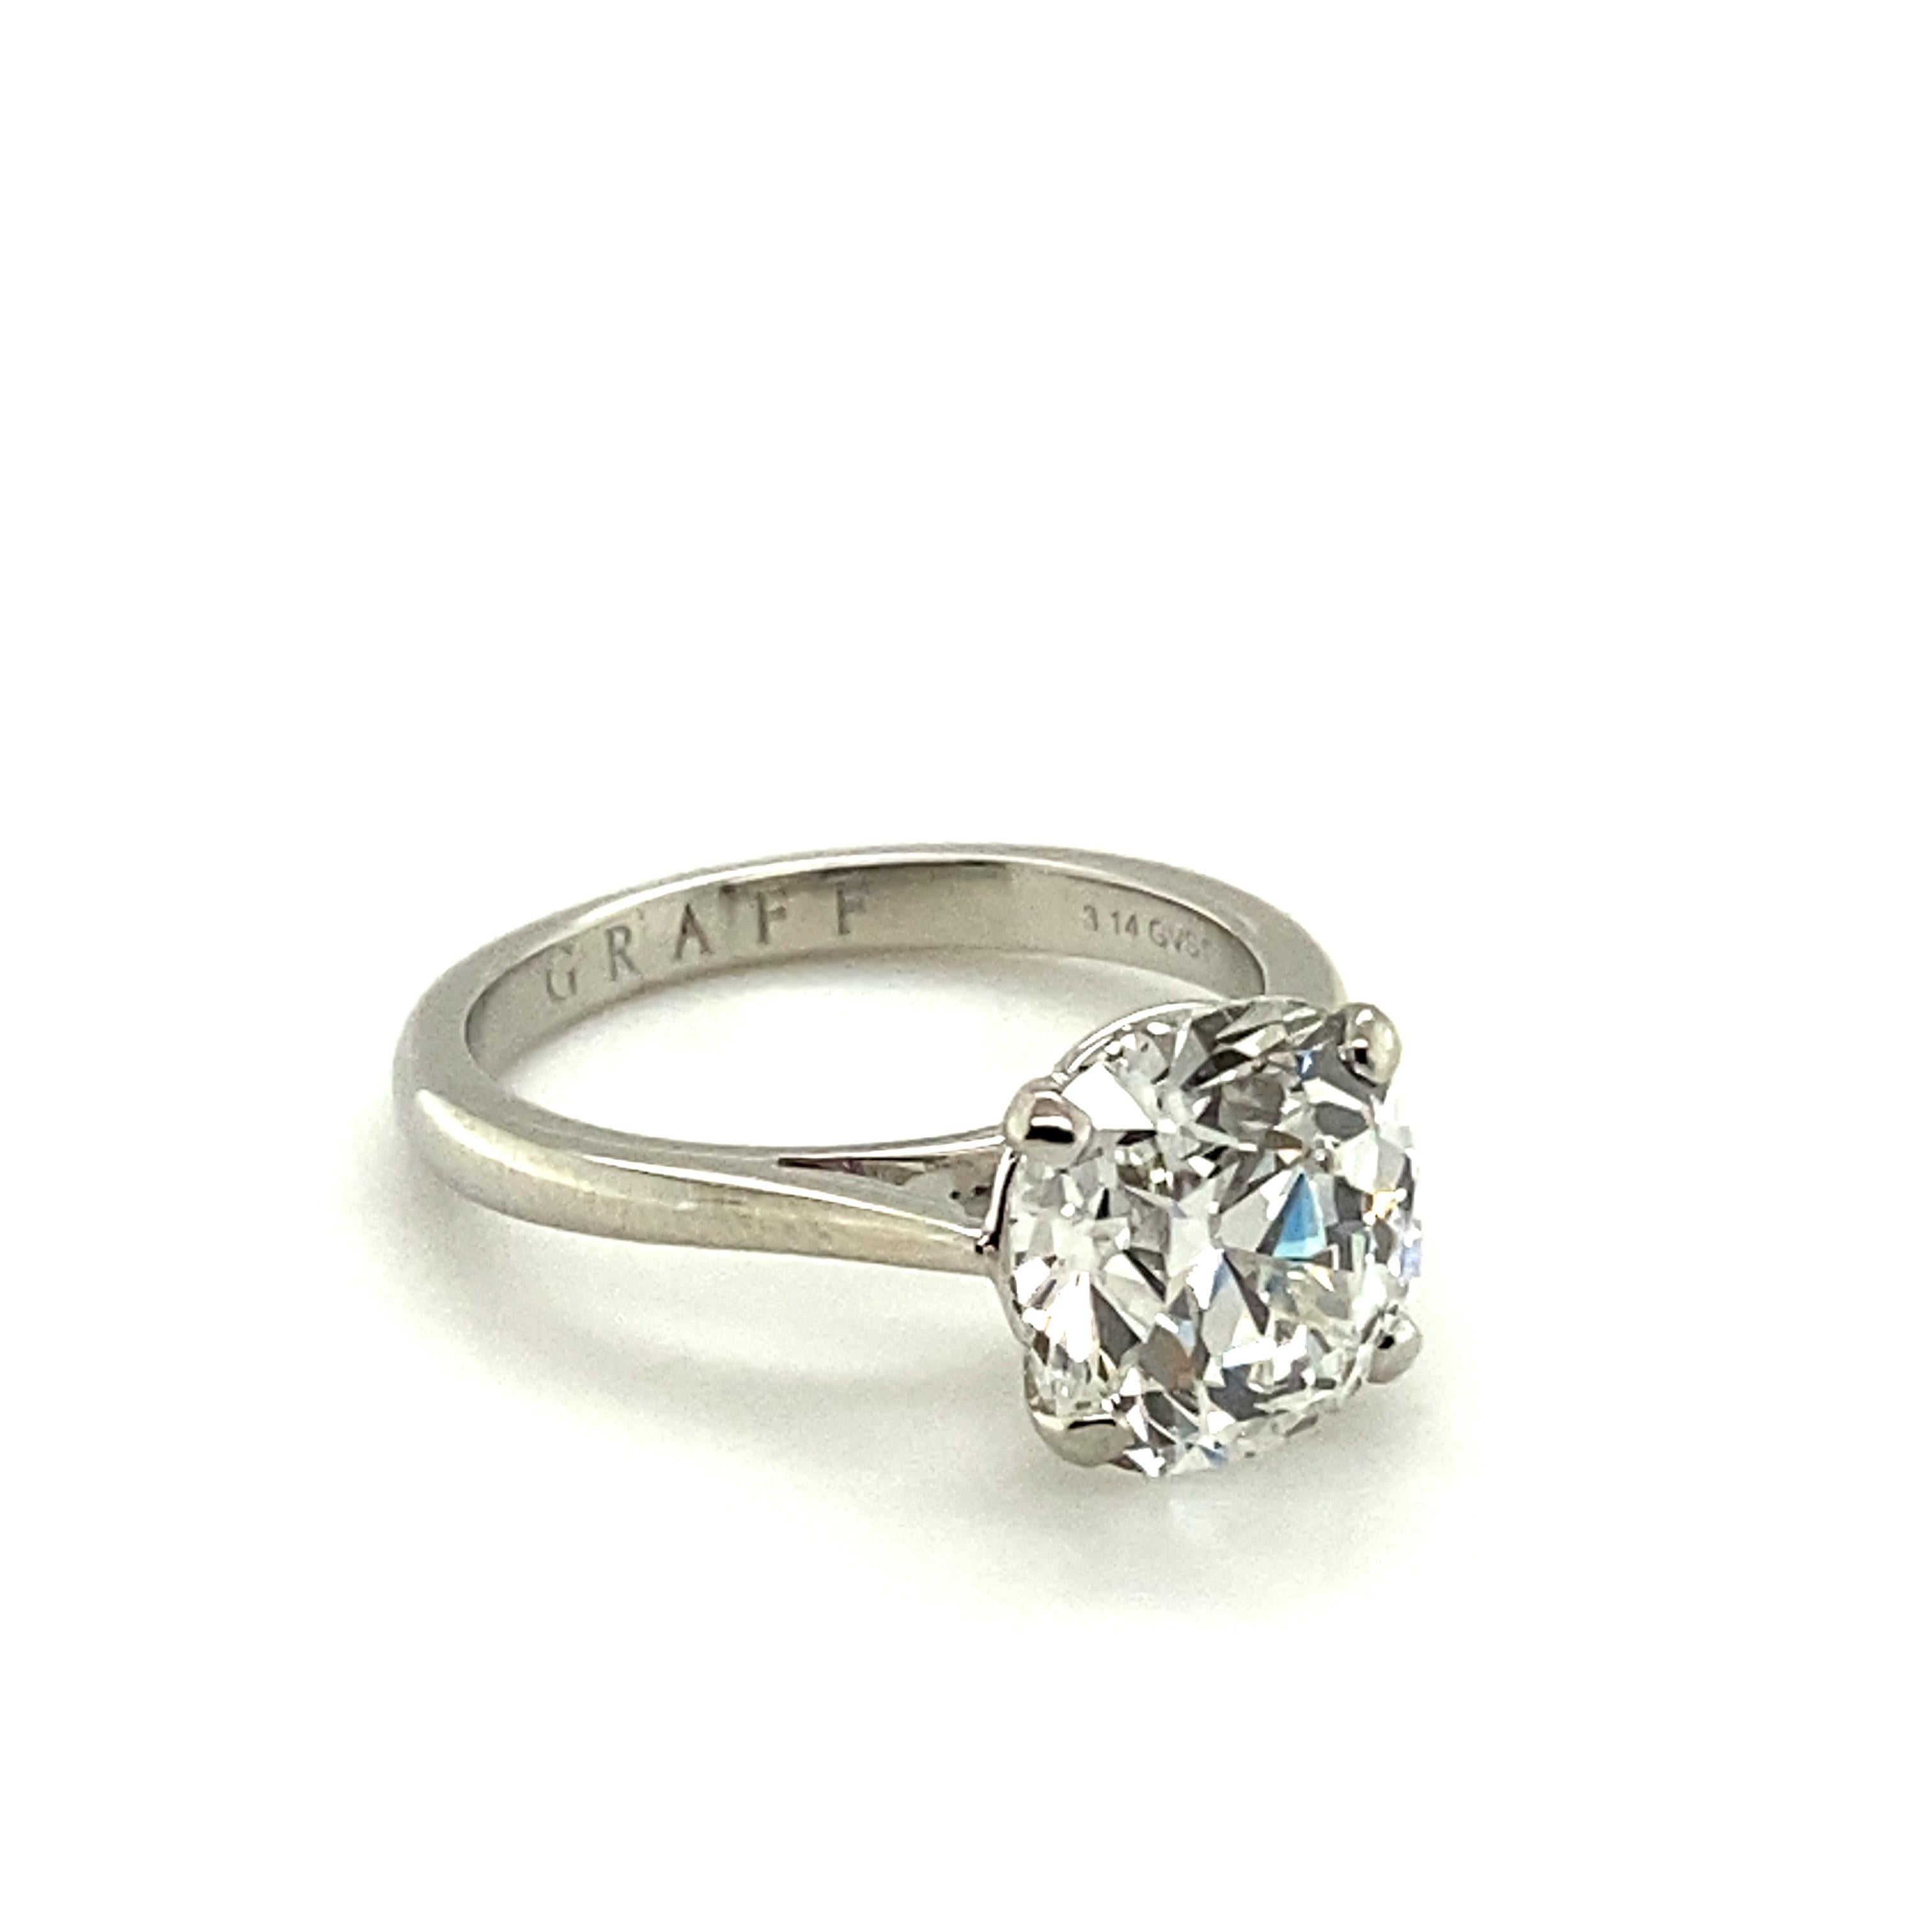 Graff Ring in 18 Karat White Gold Set with a 3.14 Ct Cushion-Shaped Diamond 6